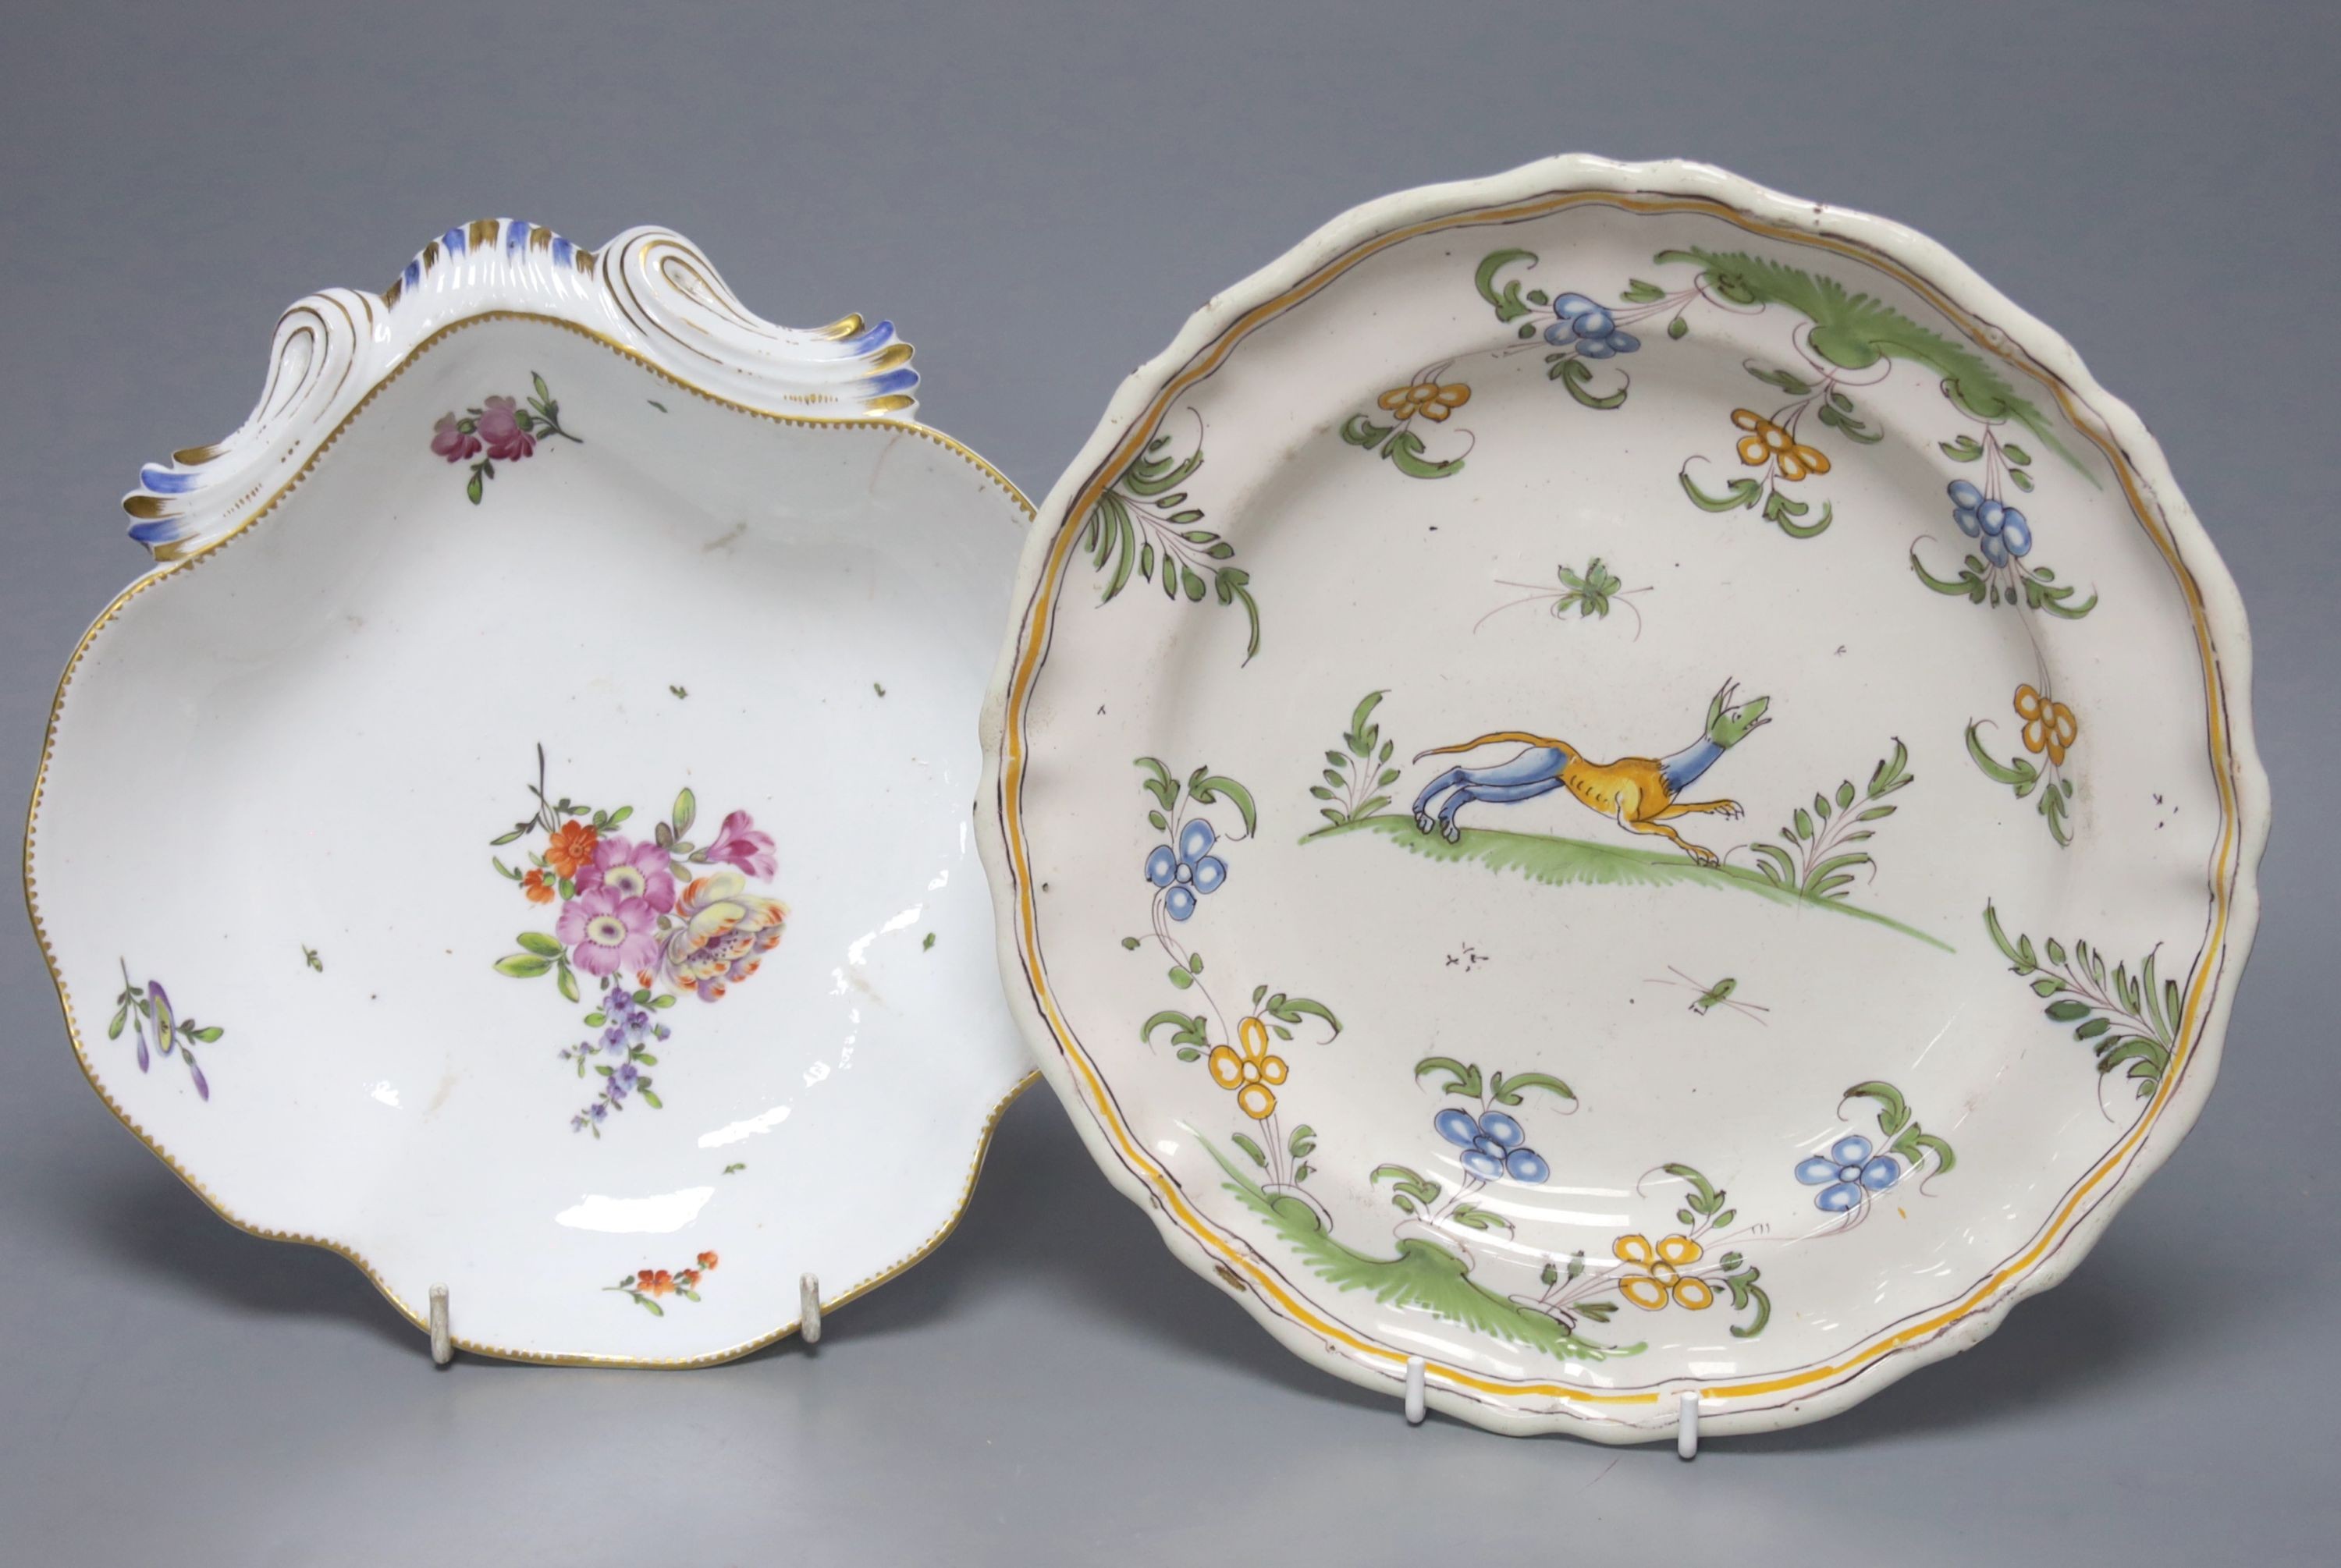 An 18th century Moustiers faience plate and a late 18th century Continental porcelain desert dish, plate 25 cms diameter.